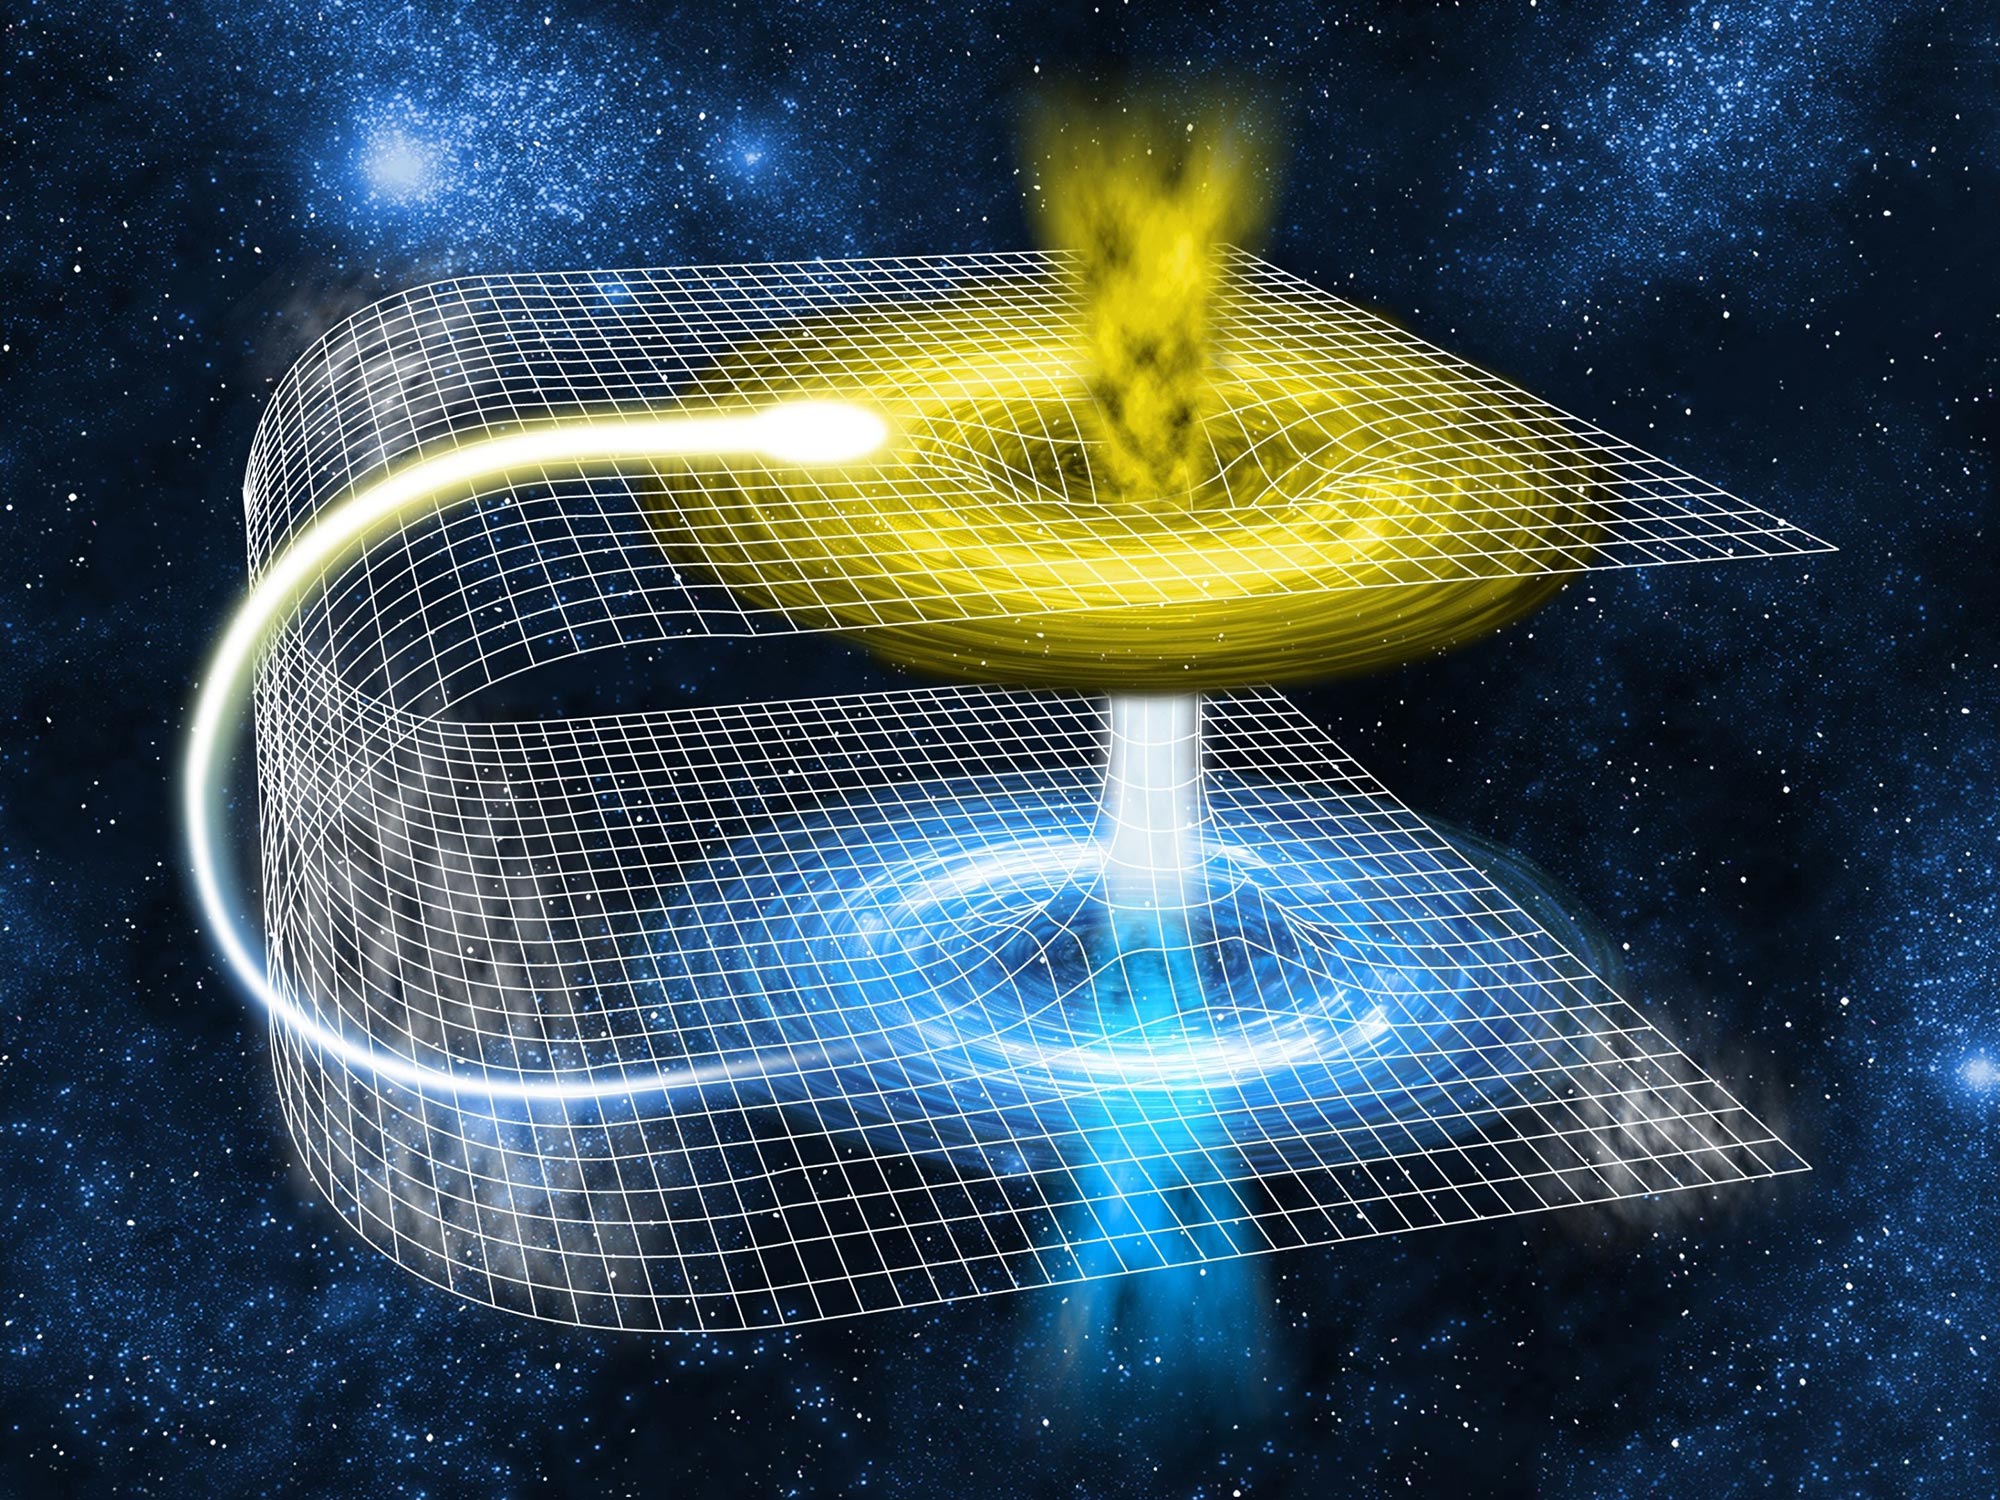 JILA physicists have measured Albert Einstein’s theory of general relativity, or more specifically, the effect called time dilation, at the smal